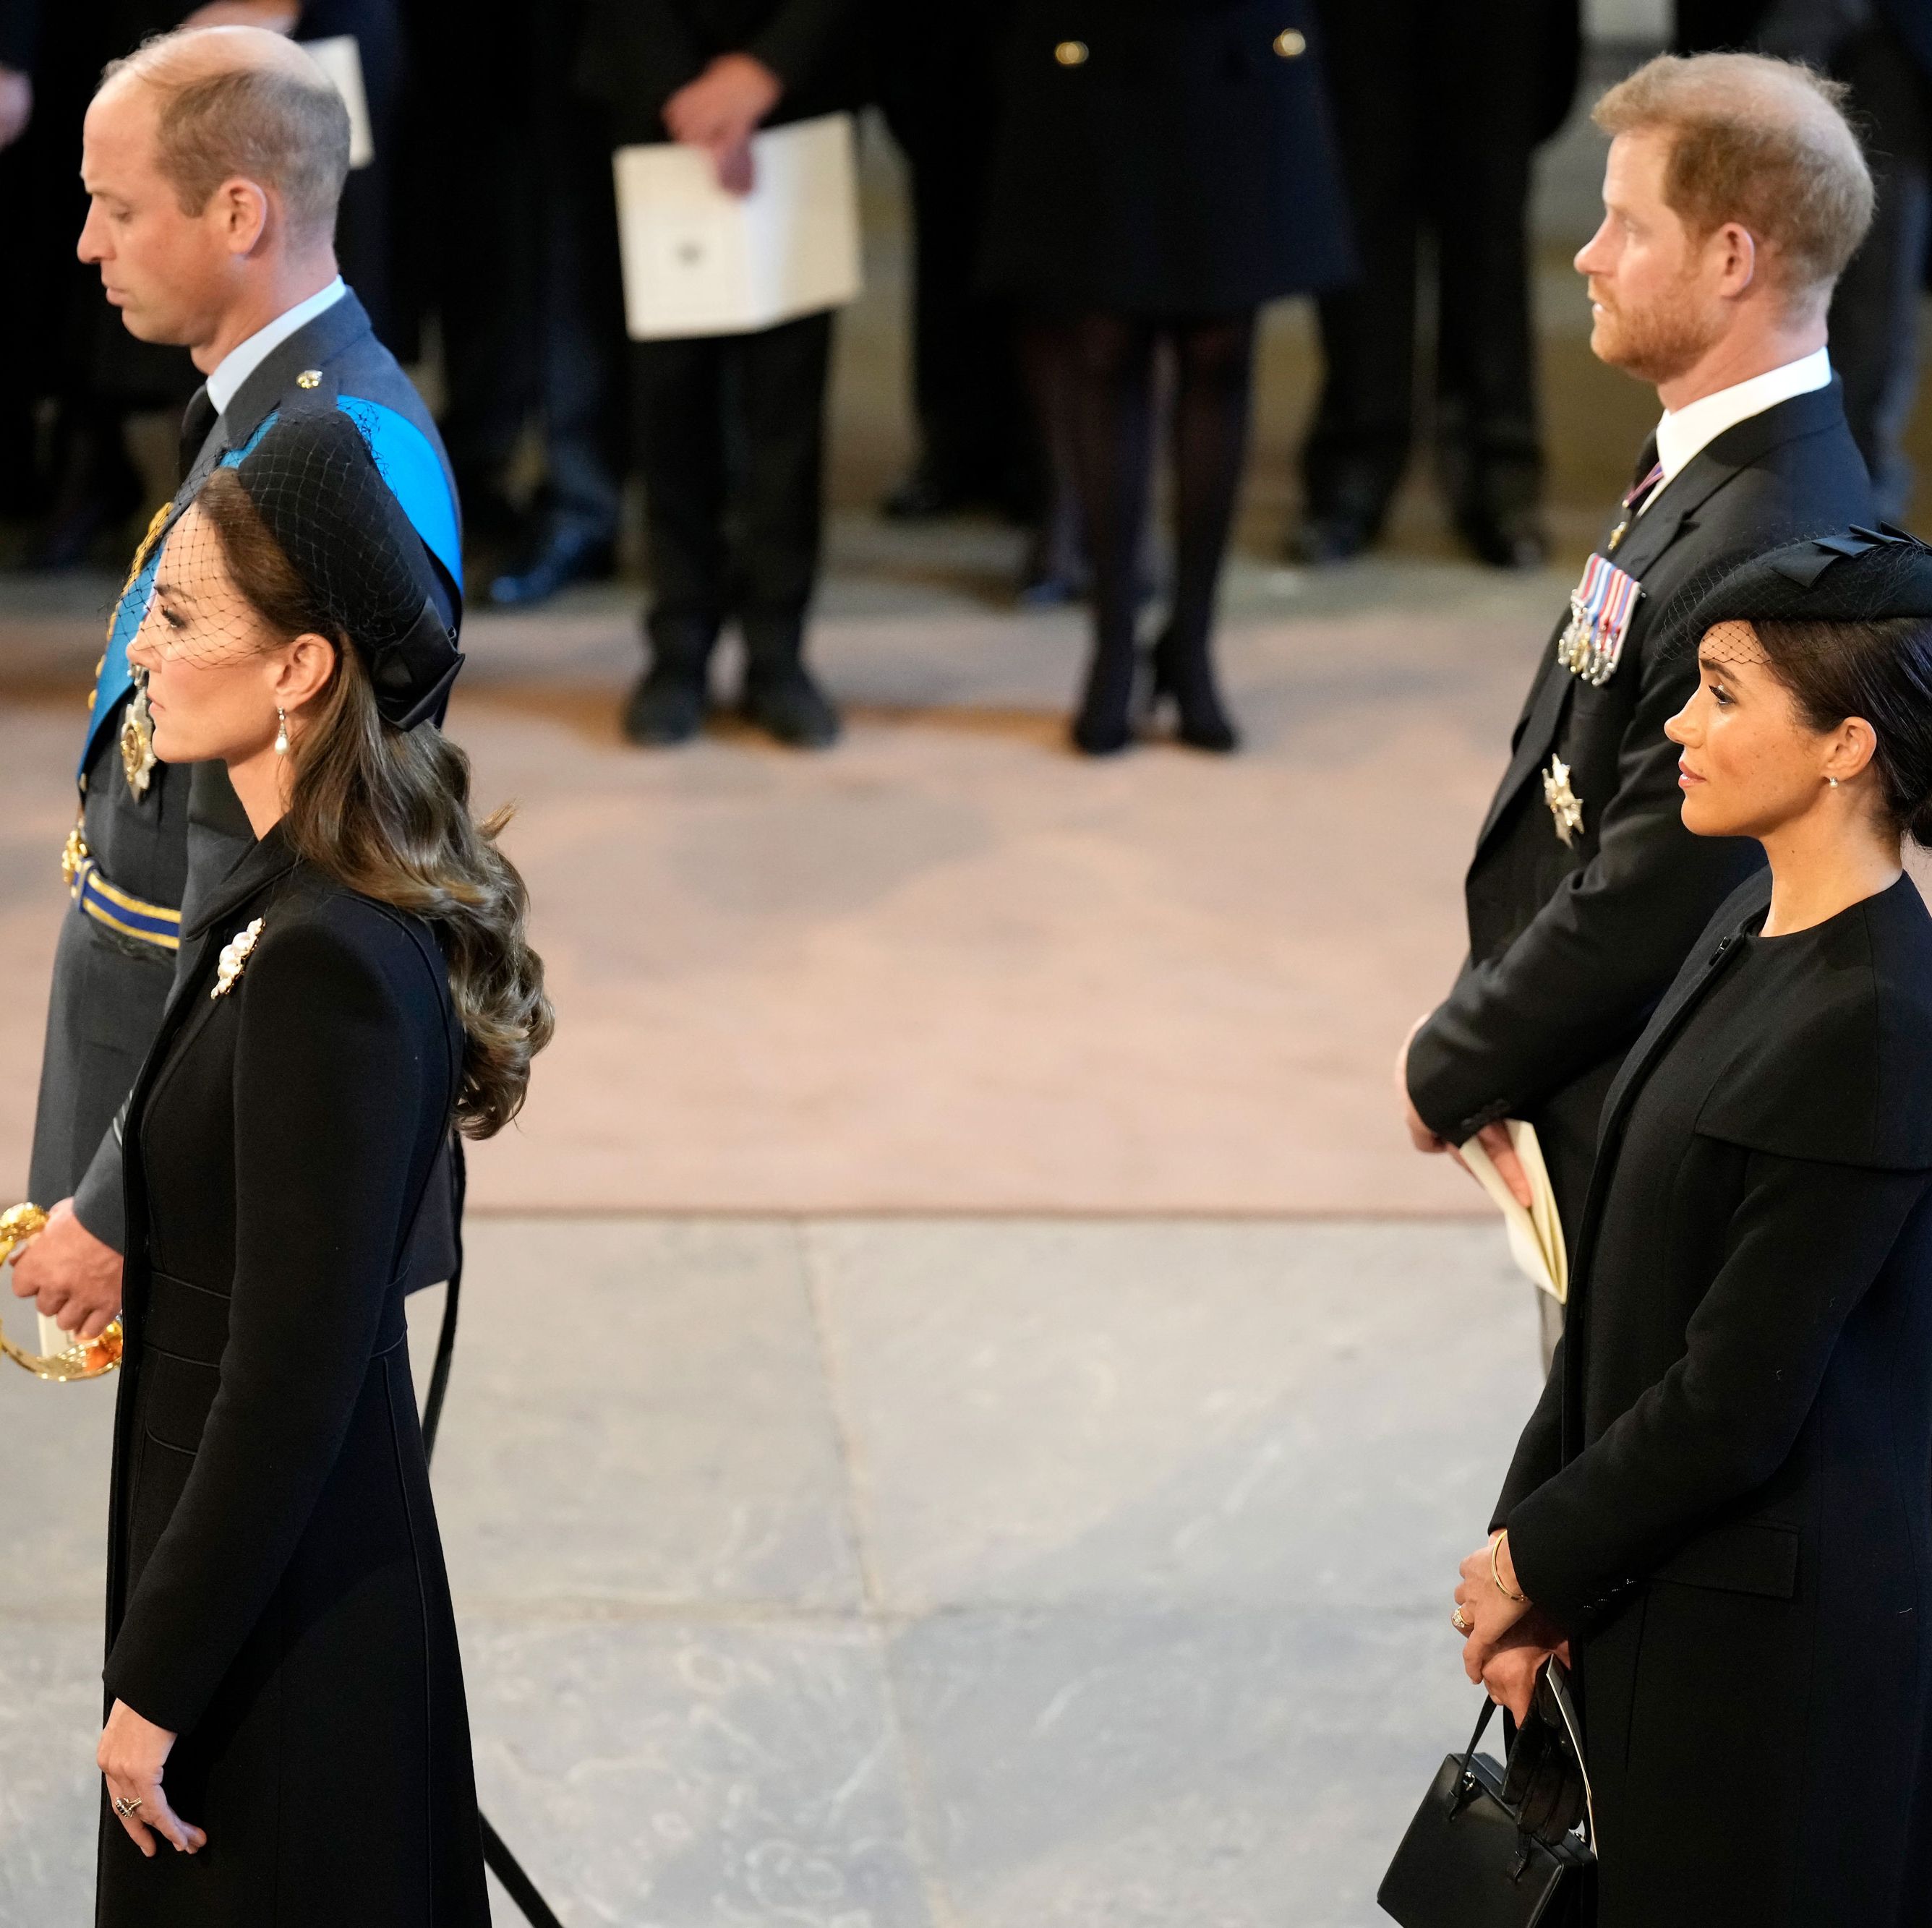 Meghan Markle and Kate Middleton Reunite But Keep Space at Queen's Coffin Procession